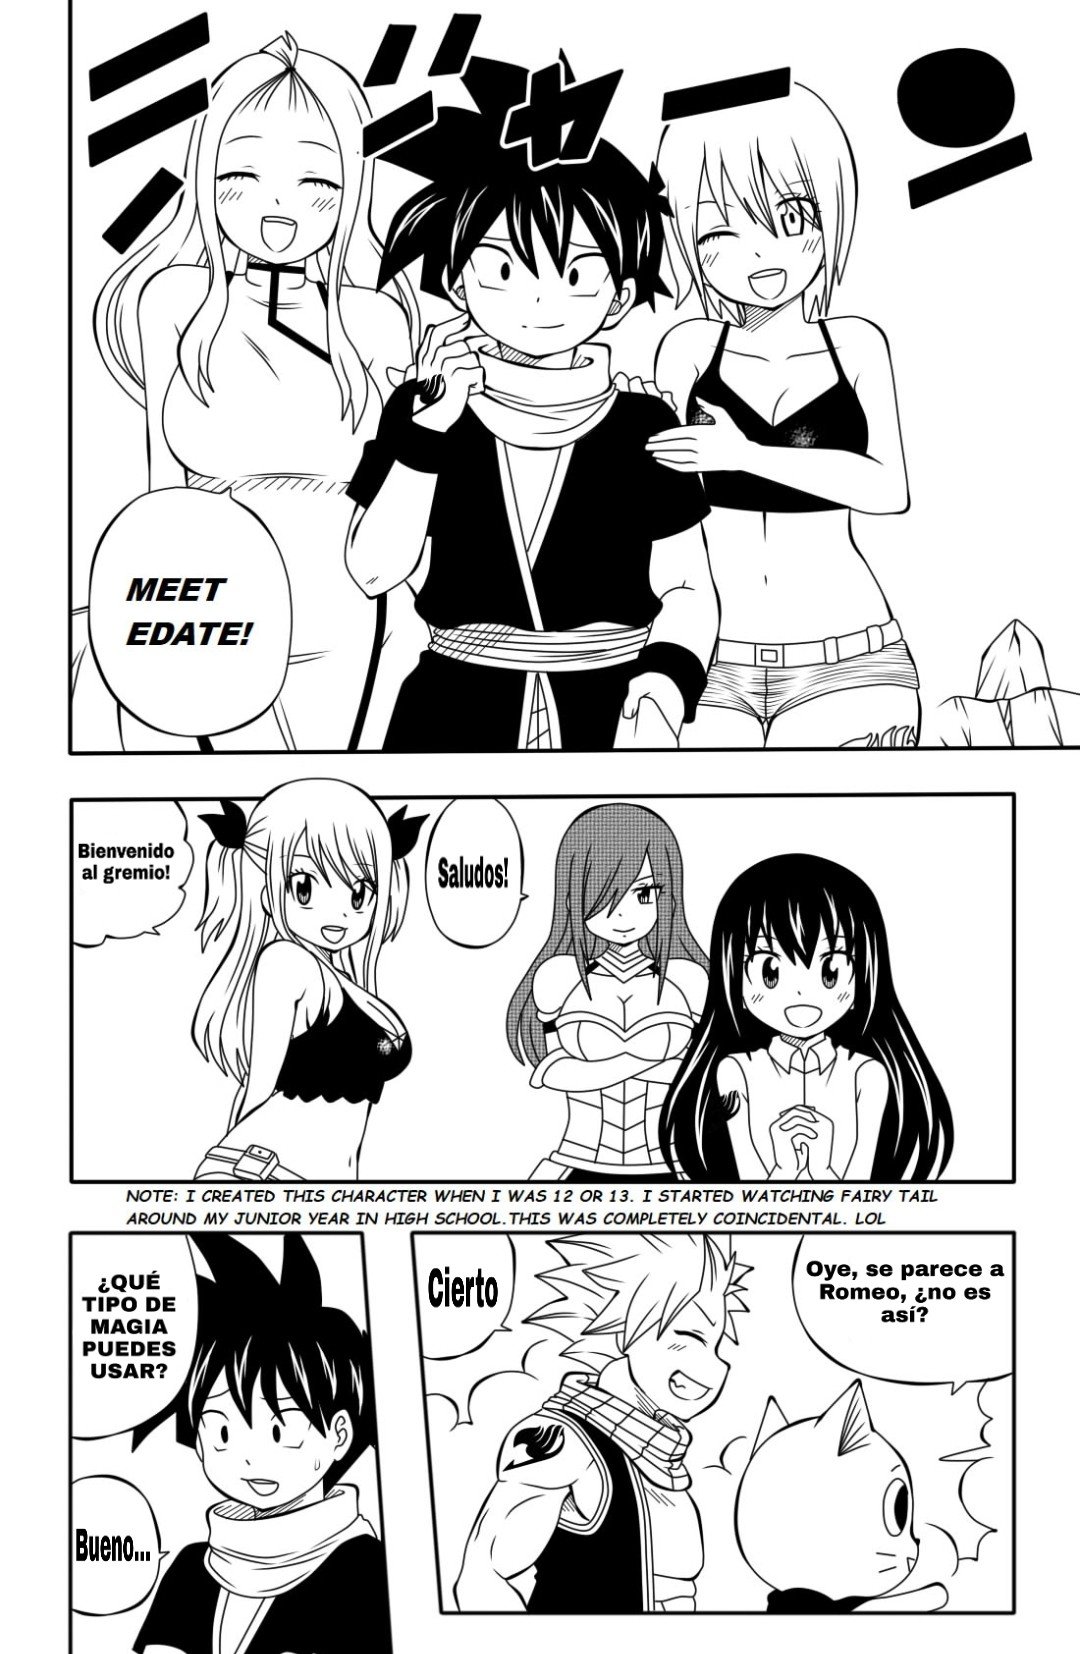 Fairy Tail H Quest 1 - 5